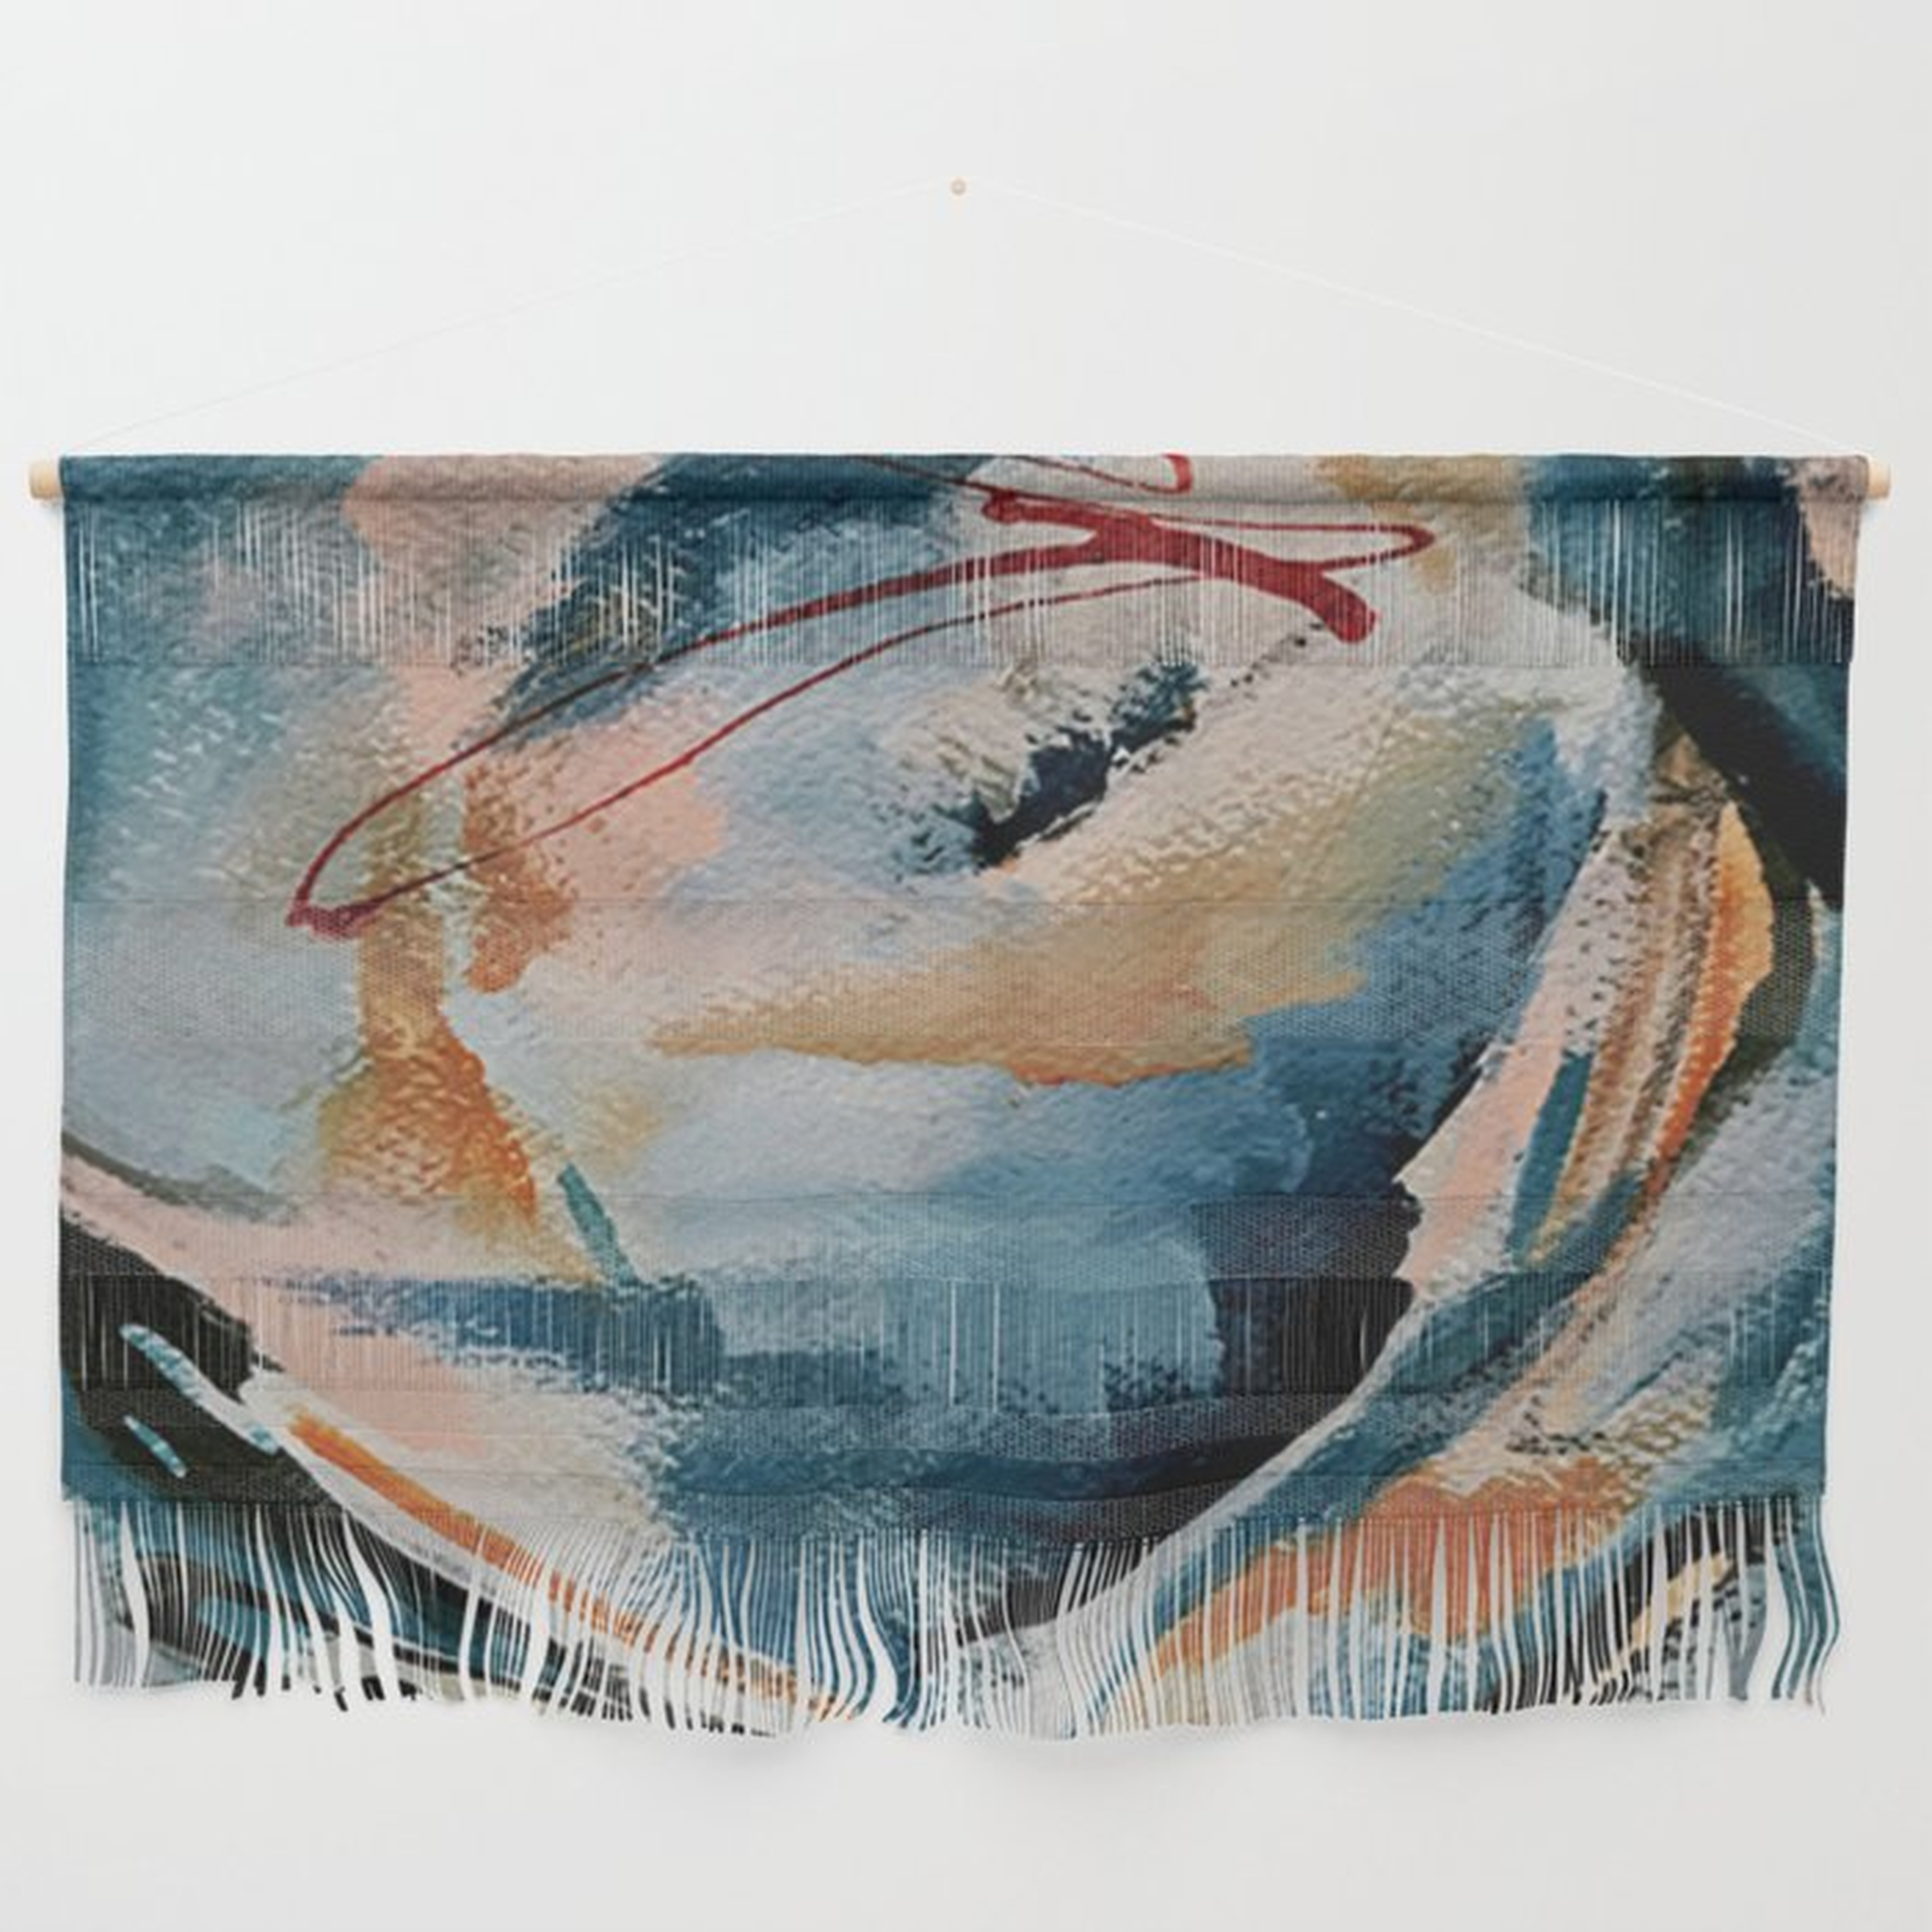 Drift 6: A Bold Mixed Media Piece In Blues, Brown, Pink And Red Wall Hanging by Alyssa Hamilton Art - Large 47" x 32.25" - Society6